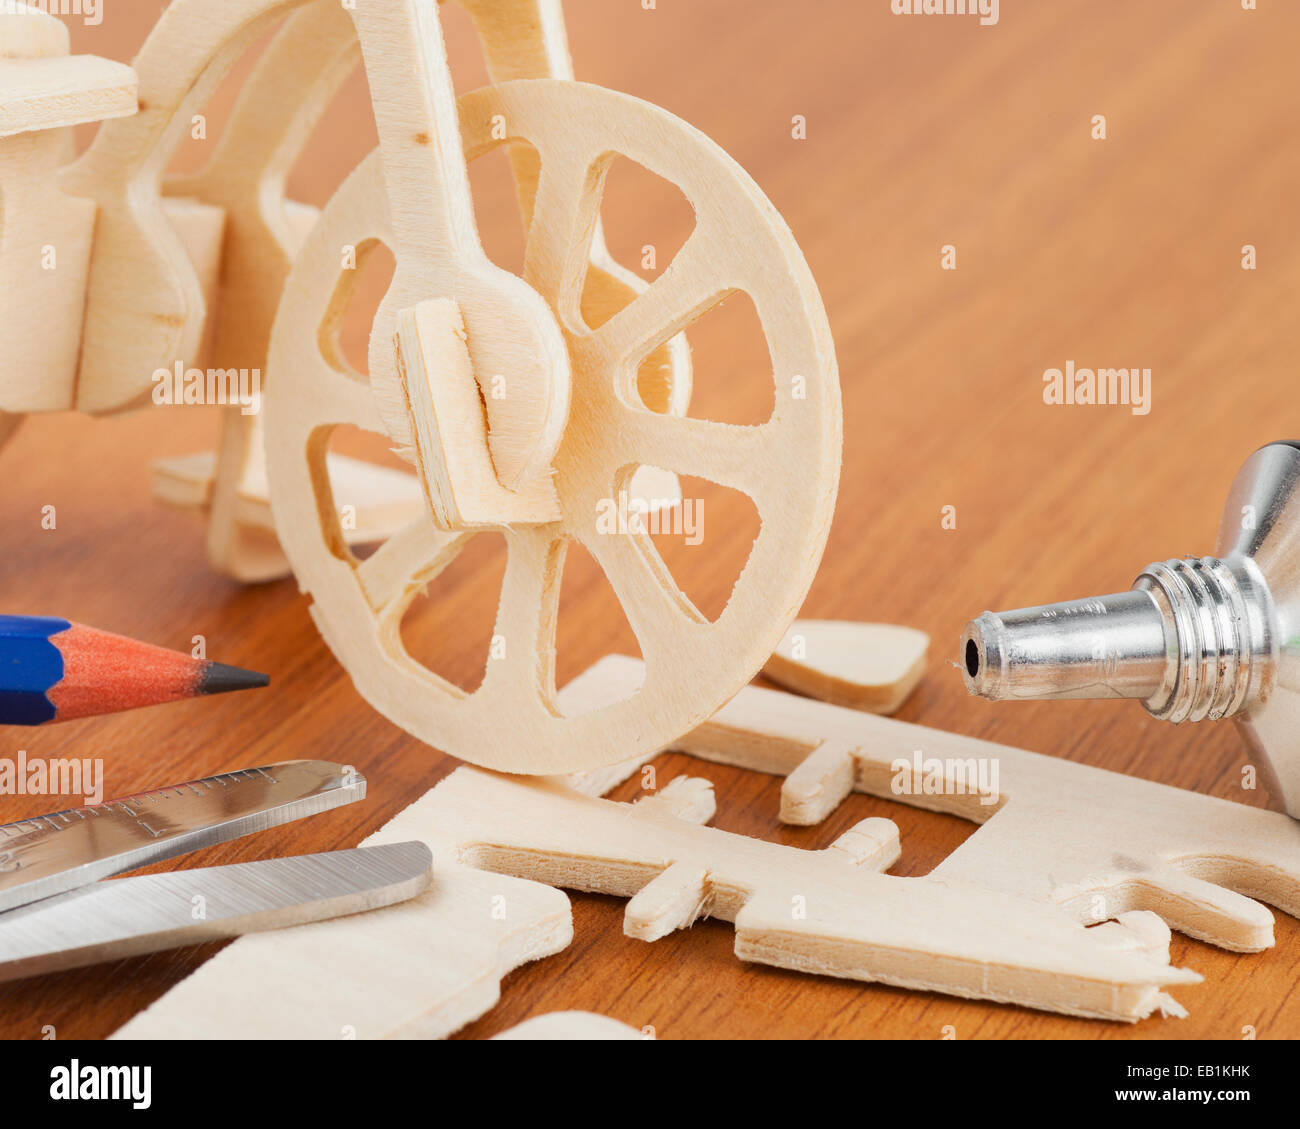 Bicicletta in legno toy - woodcraft construction kit Foto Stock